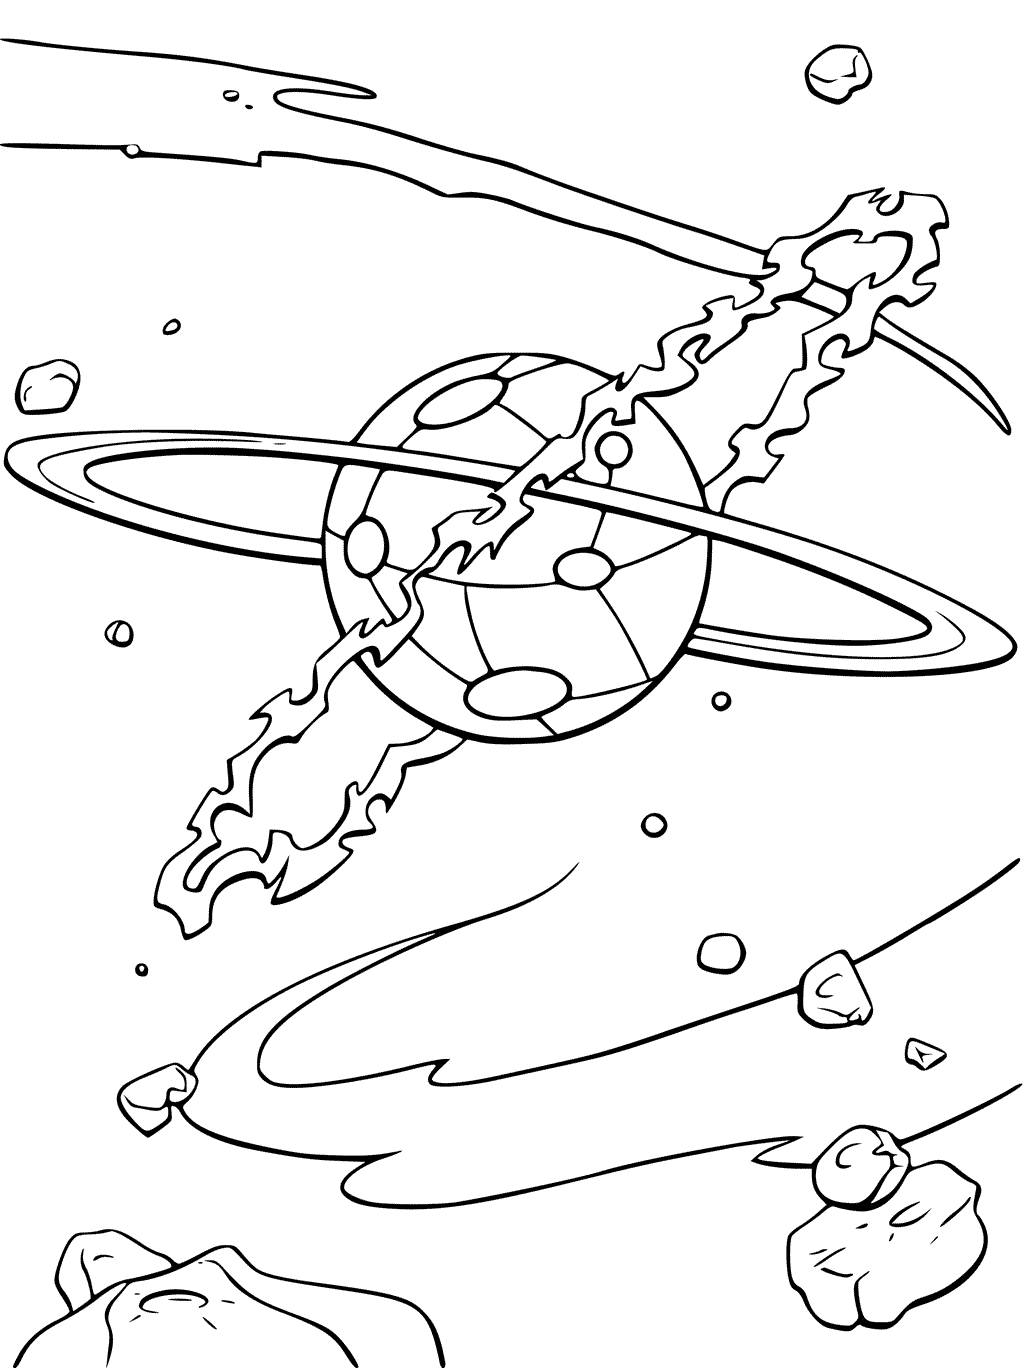 Planet In Solar System Coloring Page